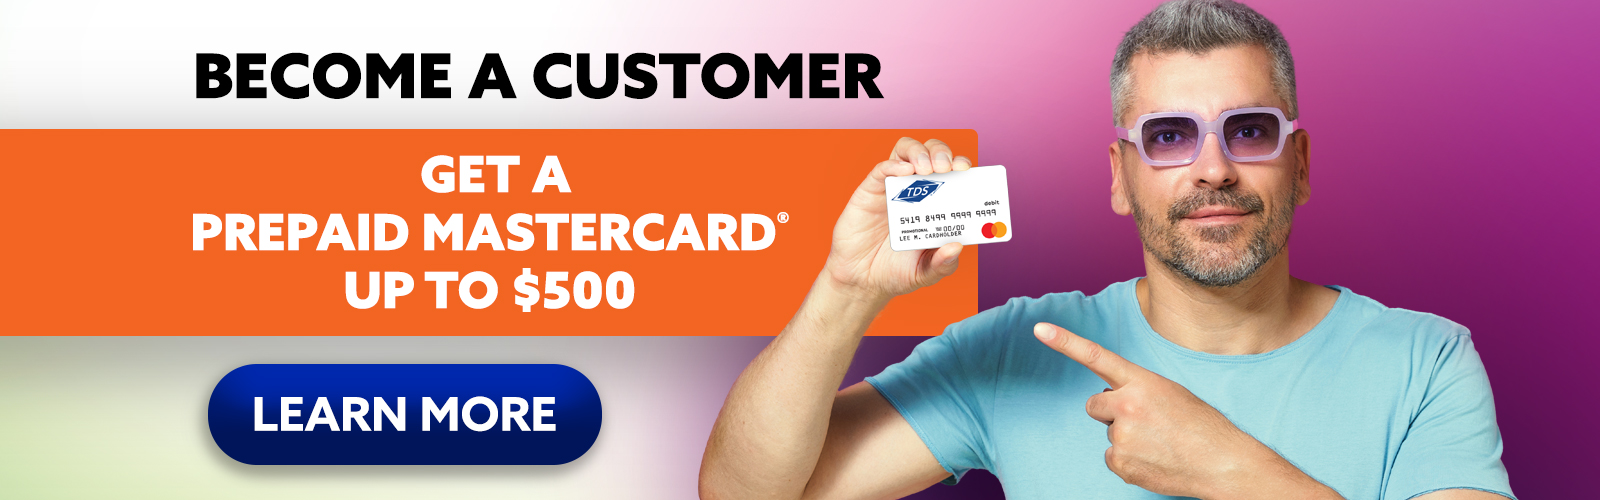 Become a Customer and Get a Prepaid Mastercard Up to $500. Click to learn more!